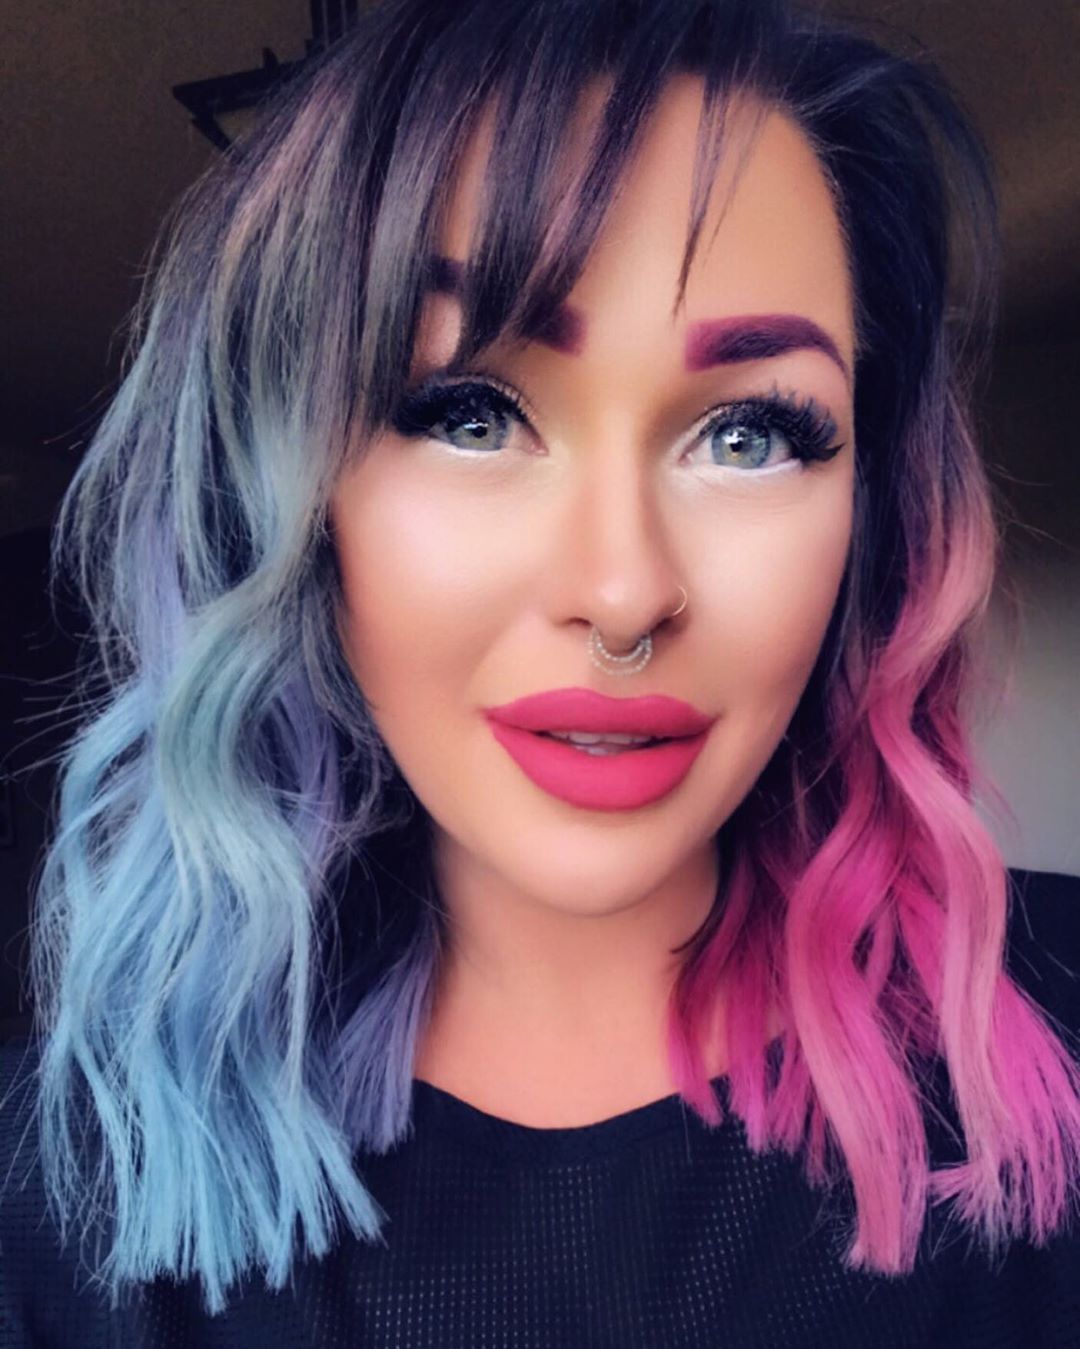 JessicaPowersPaints | PULPRIOT on Instagram: “Chopped with some @pulpriothair  Los Angeles Tousled Spray рџ’ЃрџЏ»вЂЌв™ЂпёЏ - -  @celebluxury to maintain color рџ’— @hottoolspro curling iron to style…” -   15 hair Pastel lips ideas